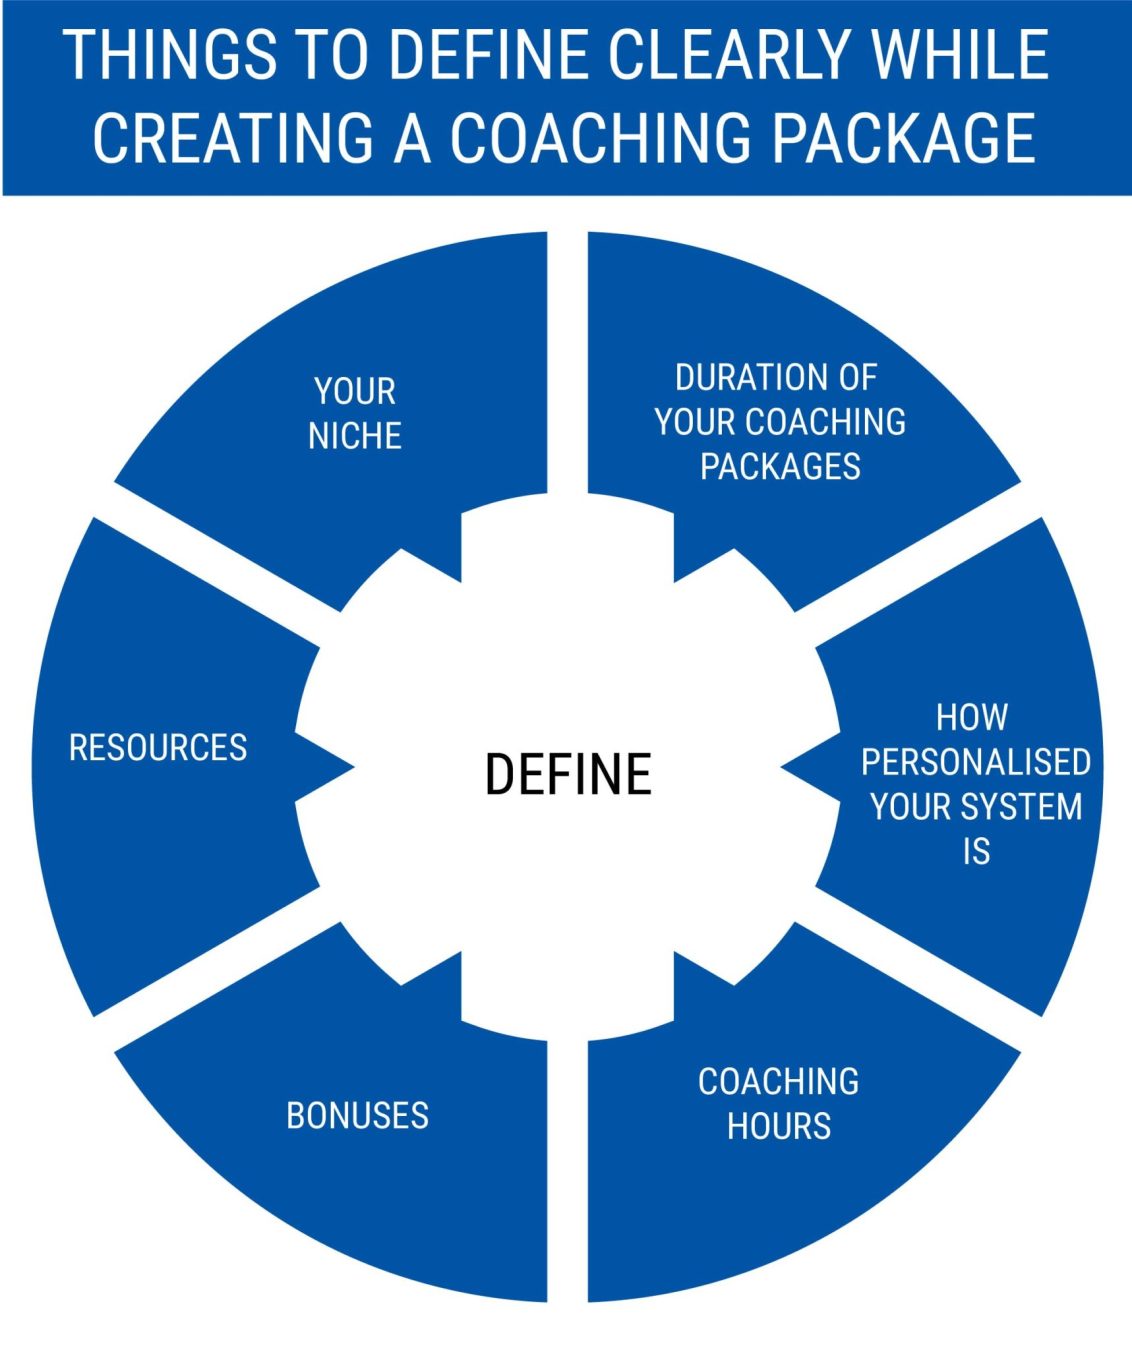 THINGS TO DEFINE CLEARLY WHILE CREATING A COACHING PACKAGE